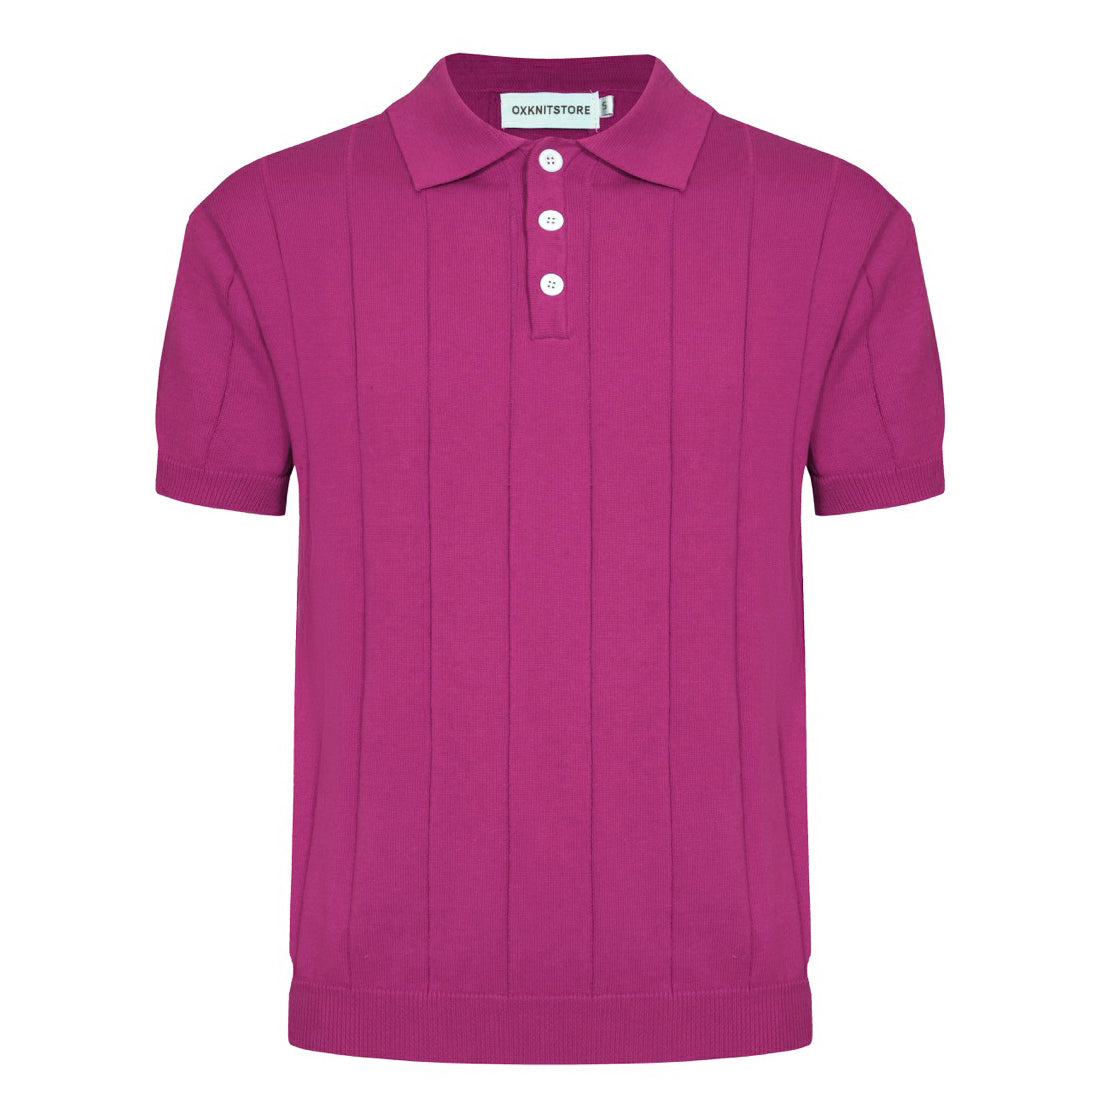 Men's Fuchsia Knitted Polo With Jacquard Panel Stripe